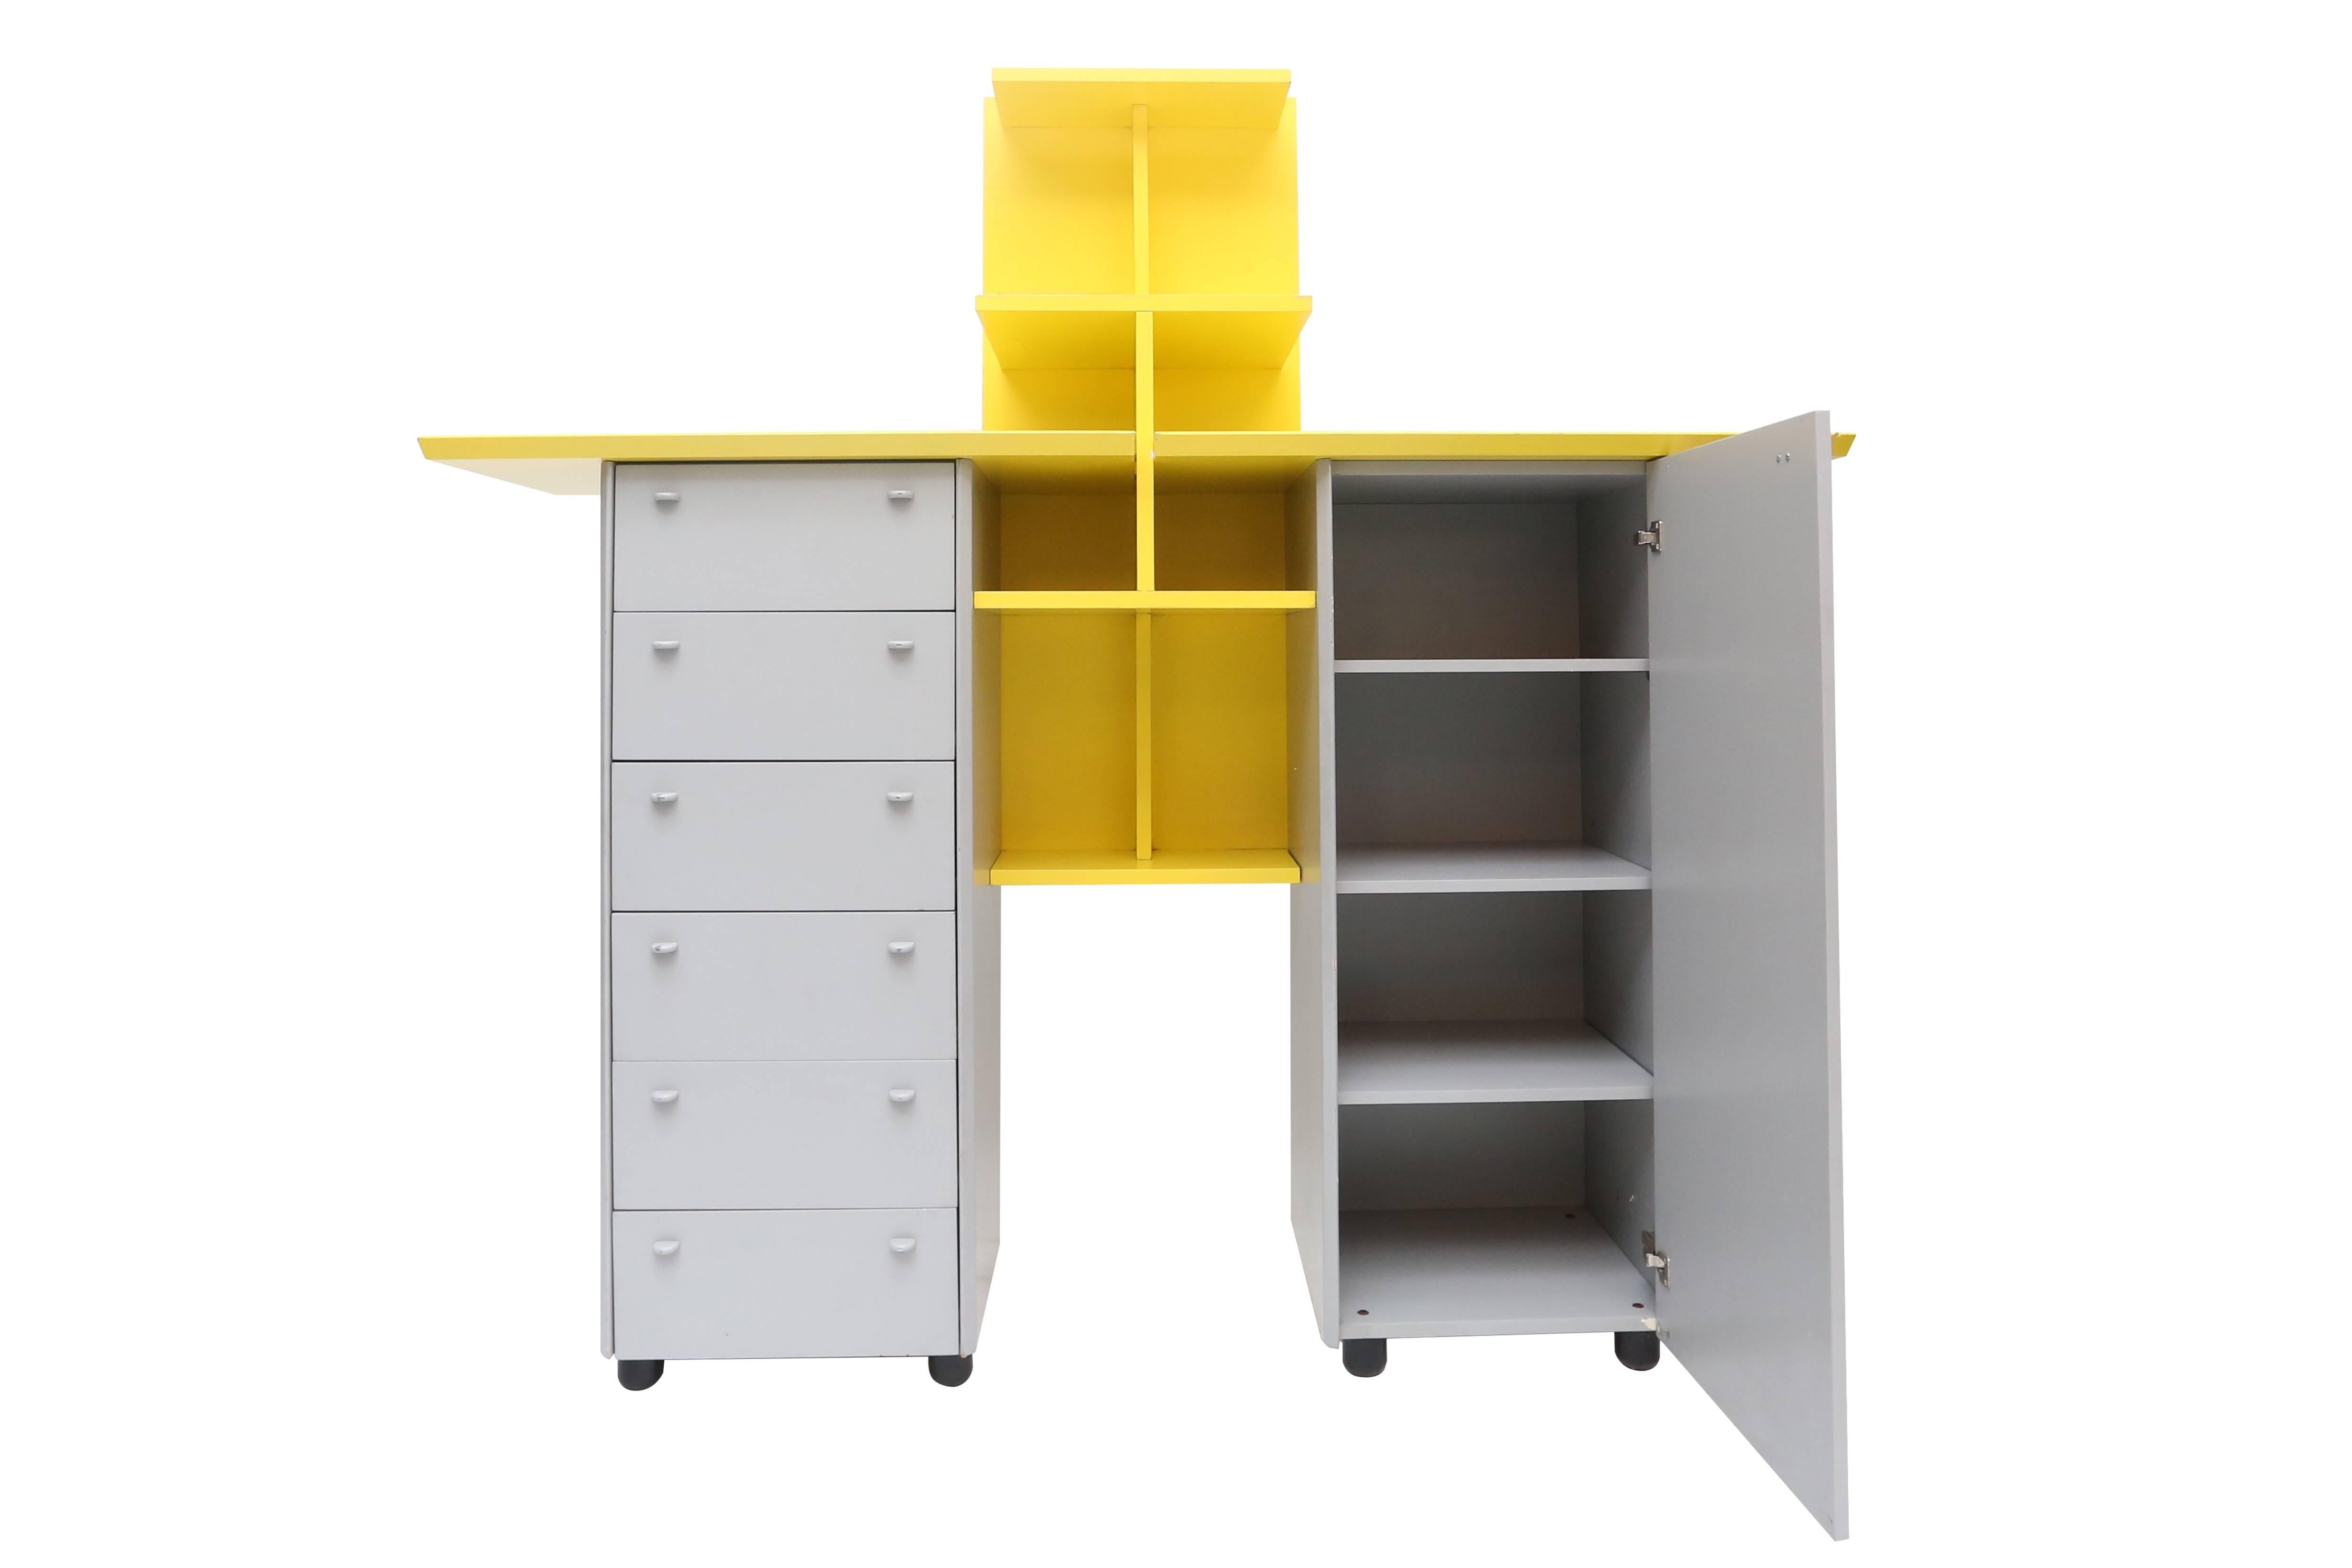 Postmodern yellow and grey 1980s storage cabinet, 
Memphis inspired custom design by Dutch Architect in laminated wood.

Measures: D 46 cm, H 185 cm, W 182 cm.